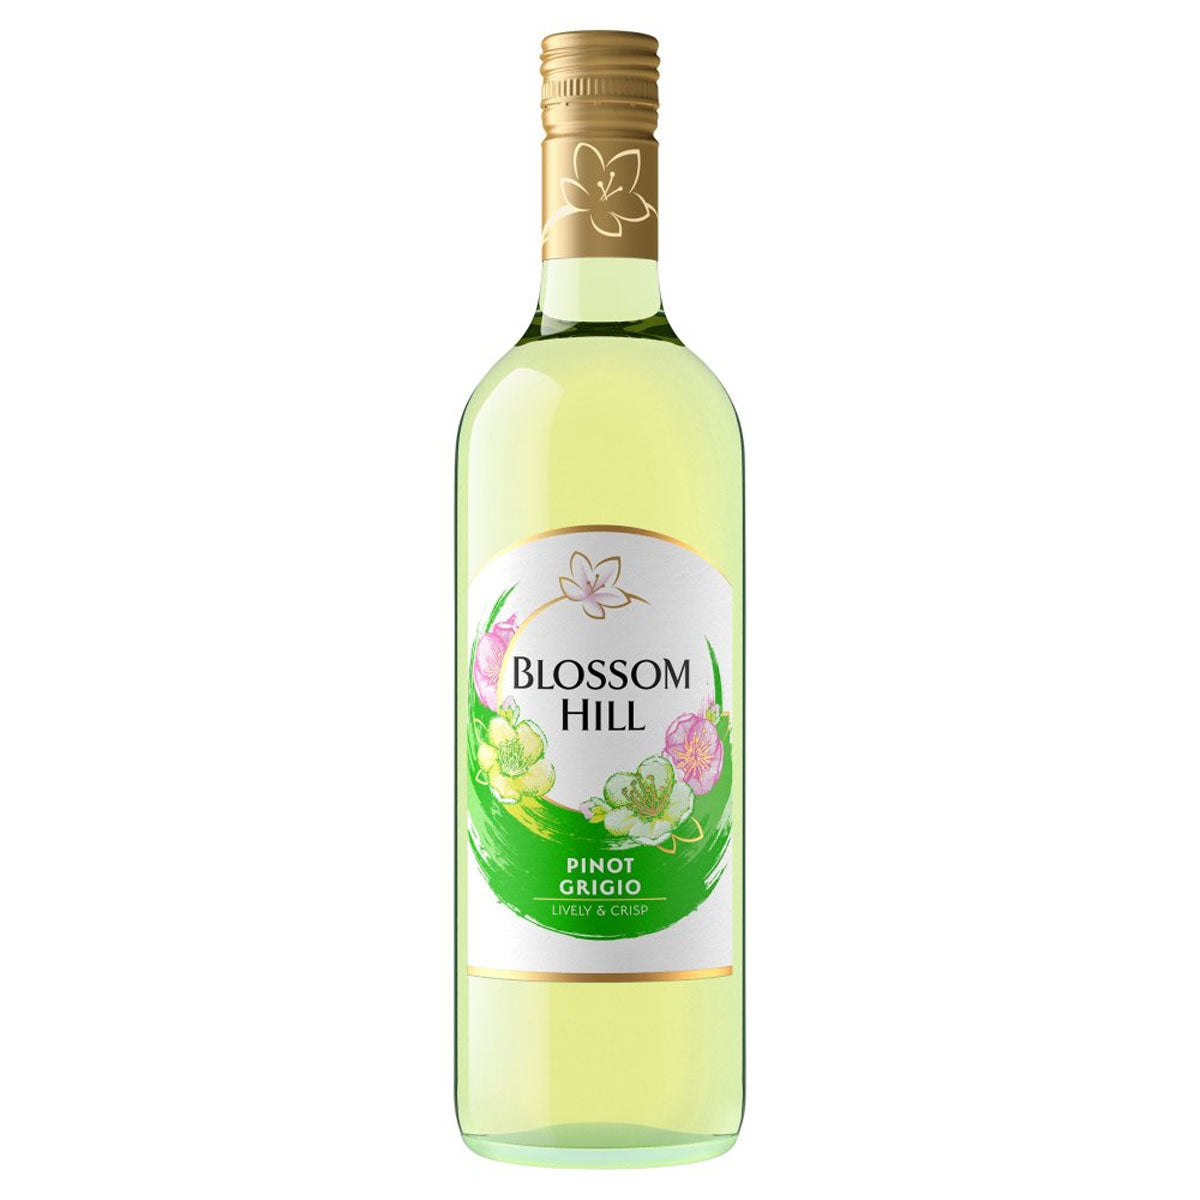 A bottle of Blossom Hill - Pinot Grigio (11% ABV) - 750ml on a white background.